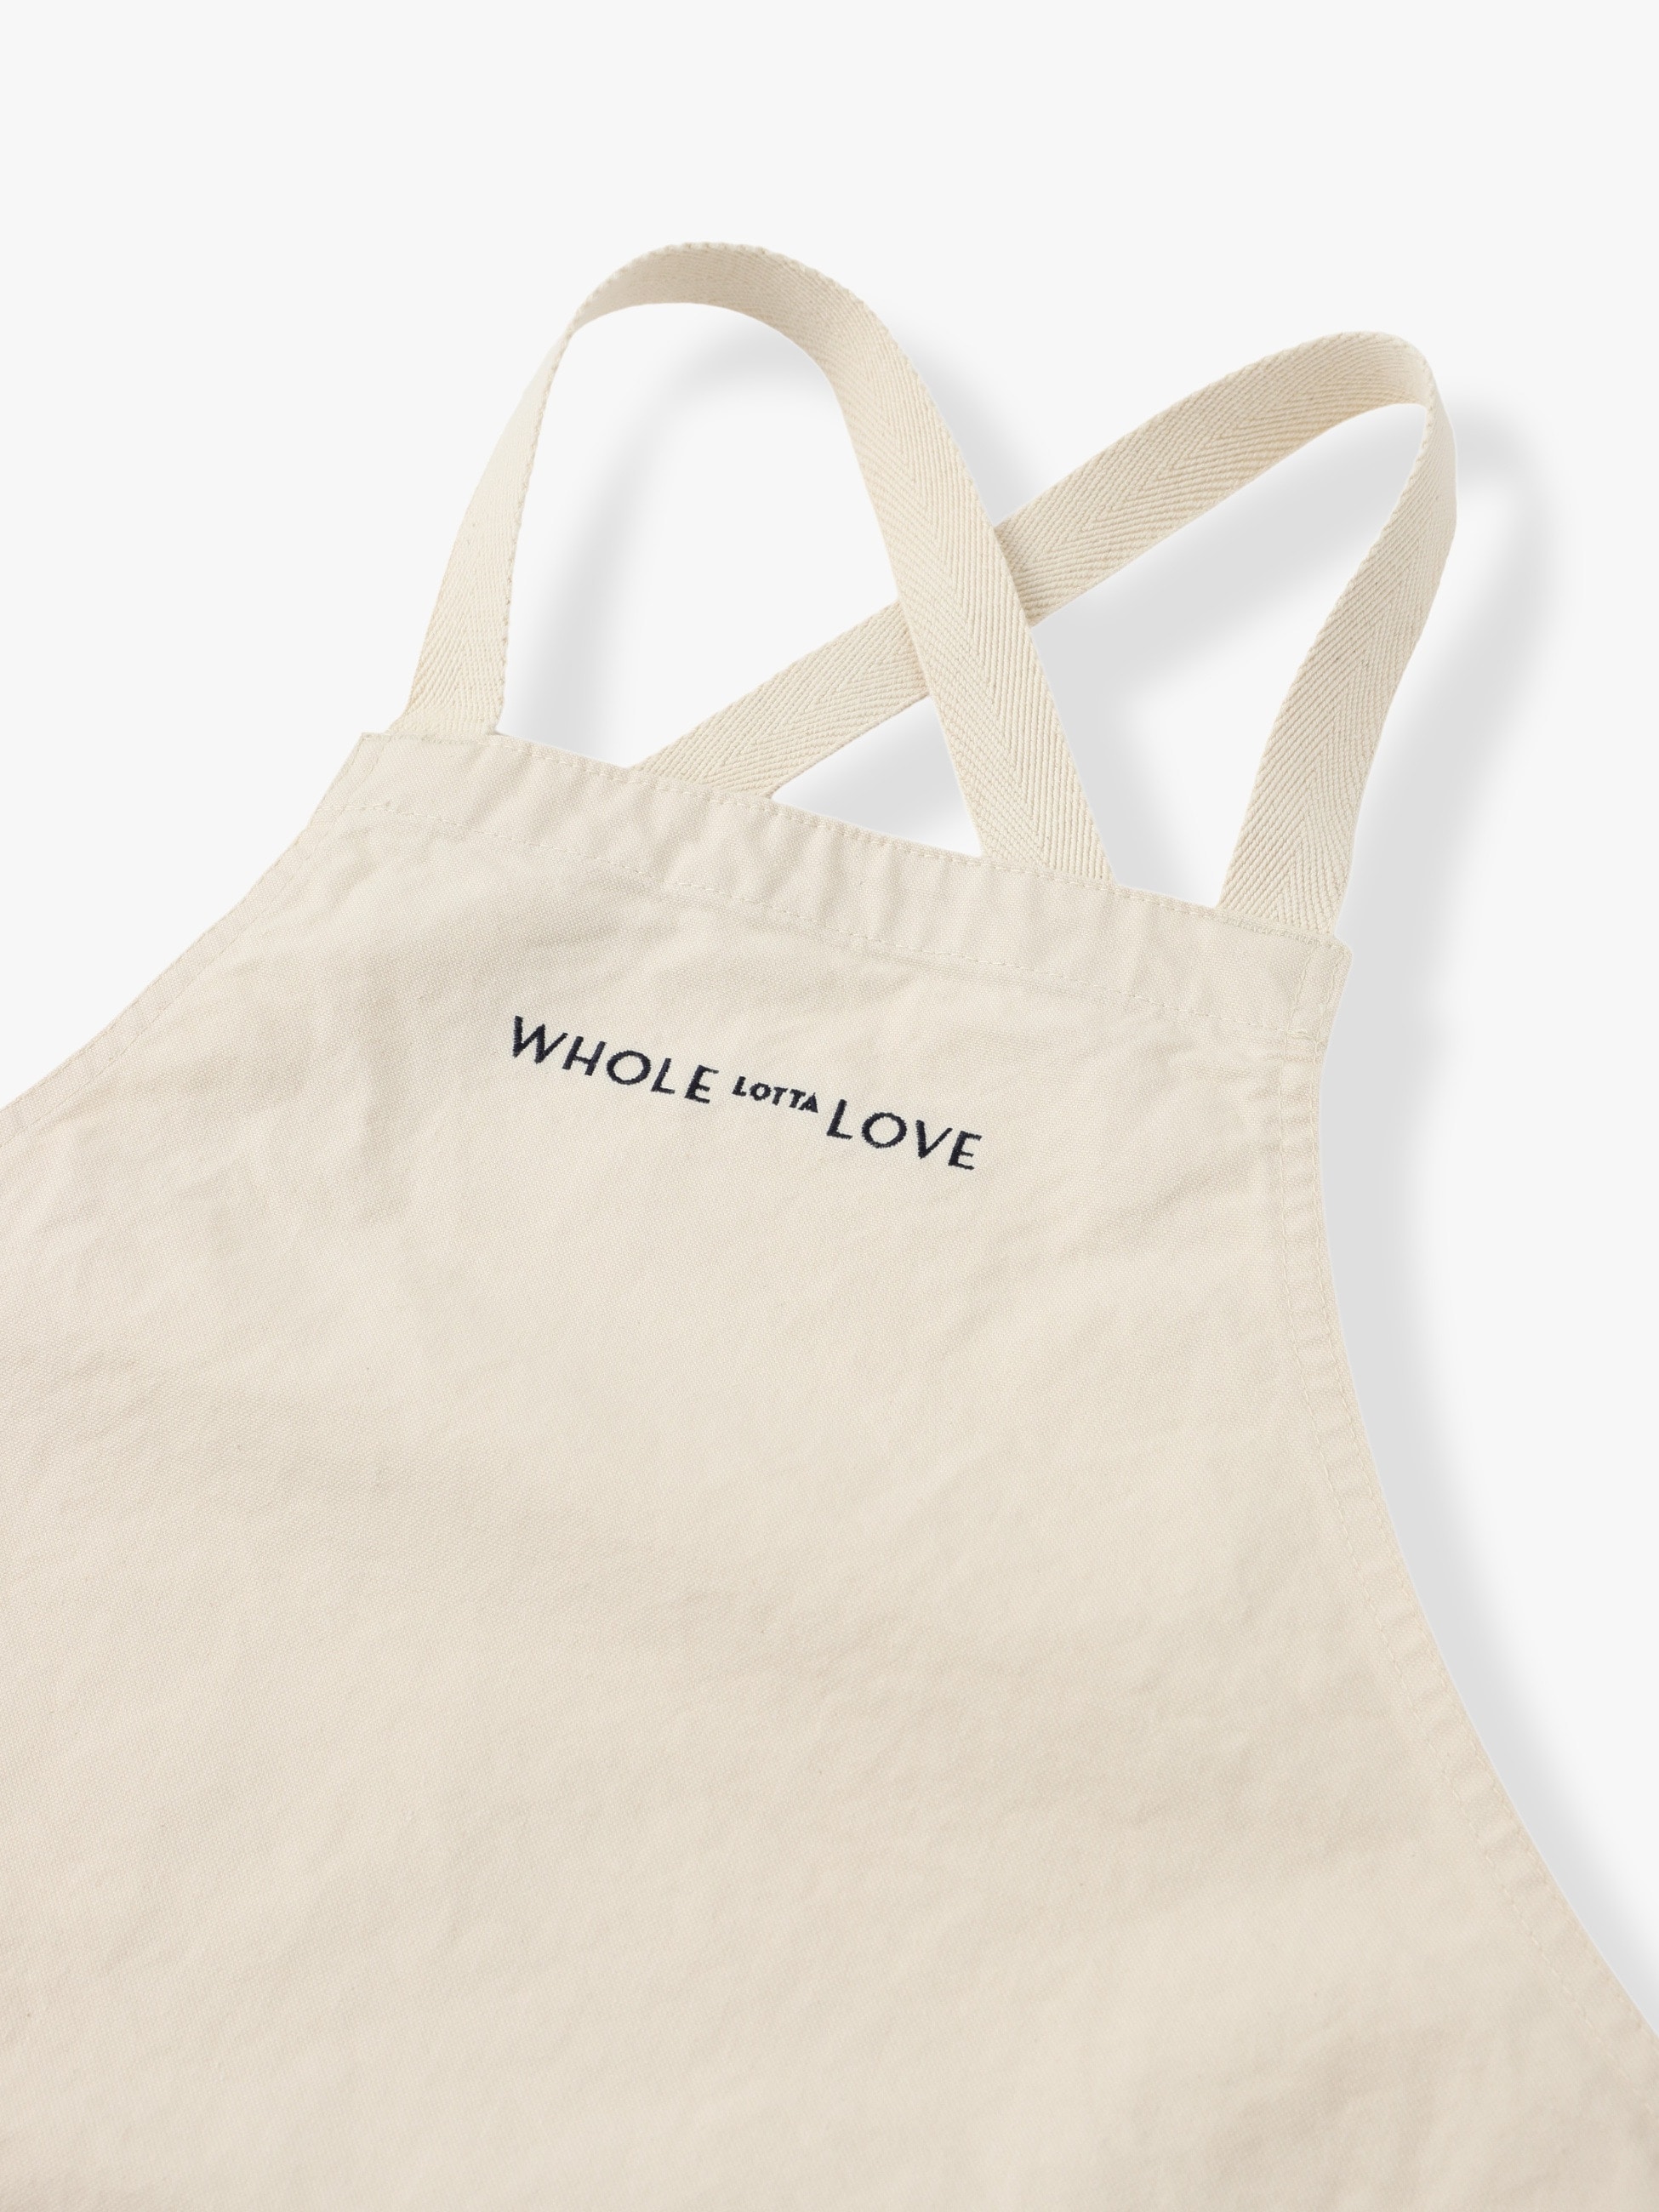 Whole Lotta Love Apron｜Ron Herman Cafe(ロンハーマン カフェ)｜Ron